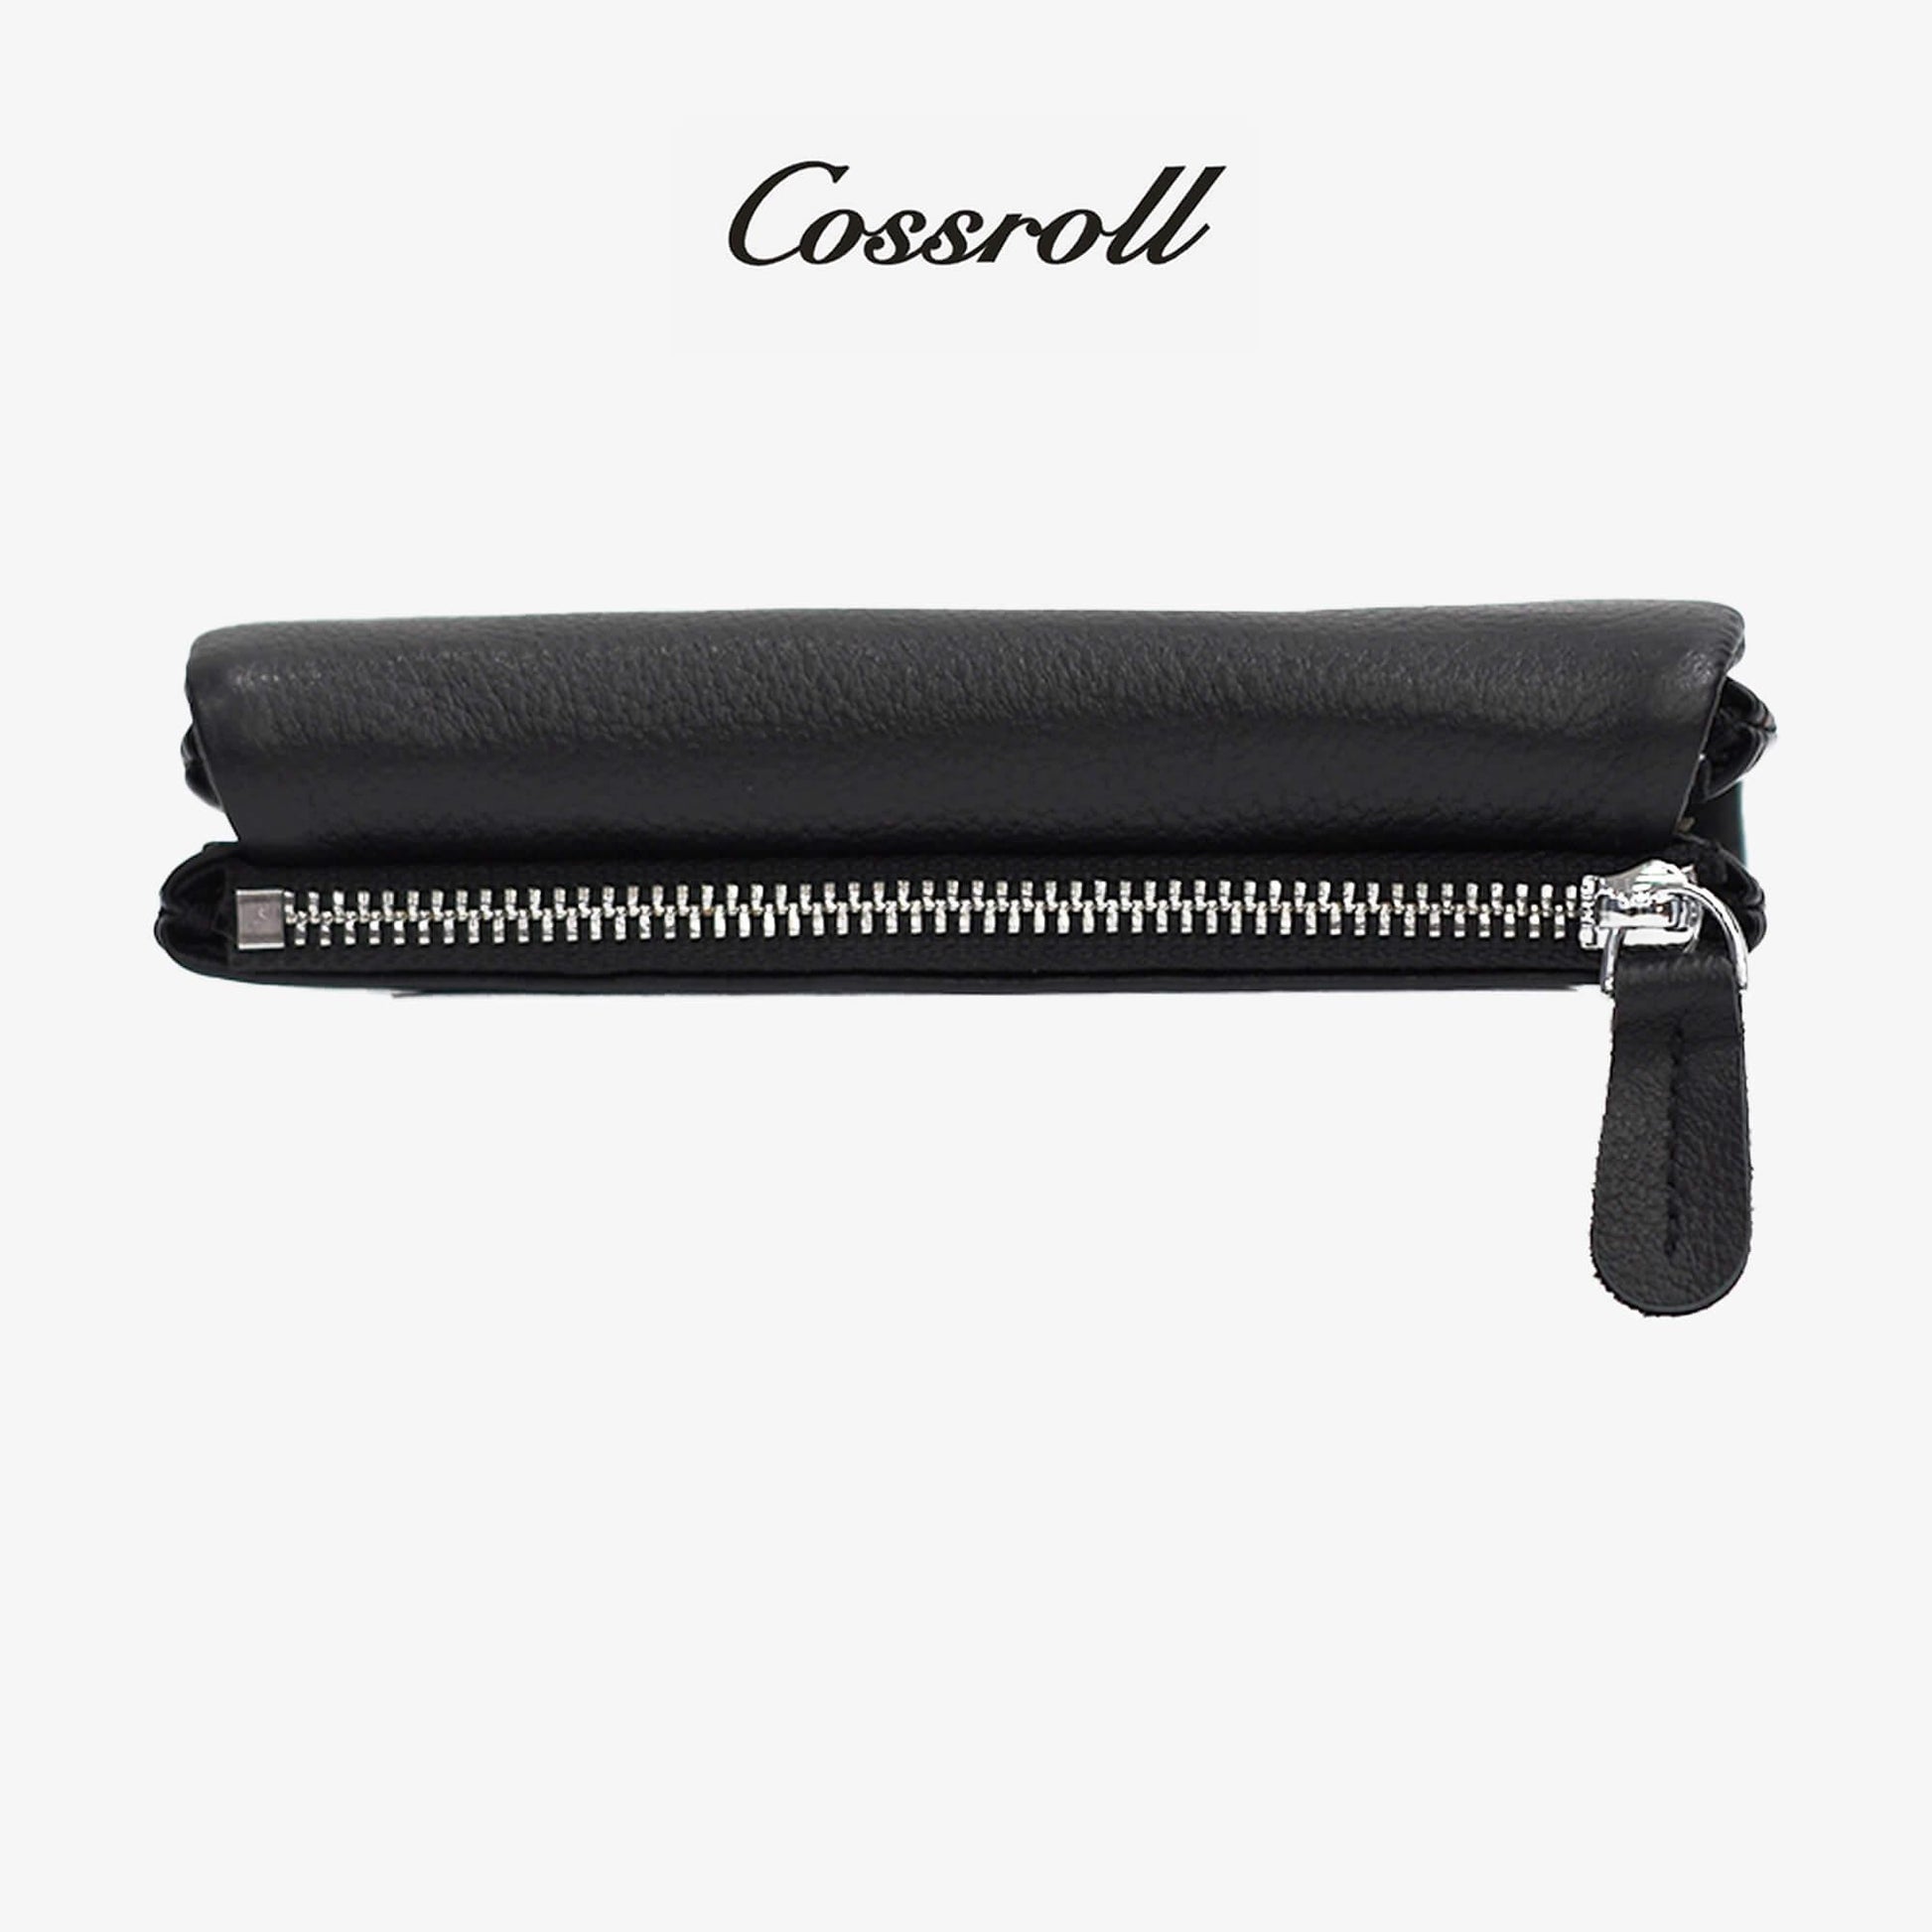 Leather Clutch Wallets Wholesale Manufactuer Cossroll